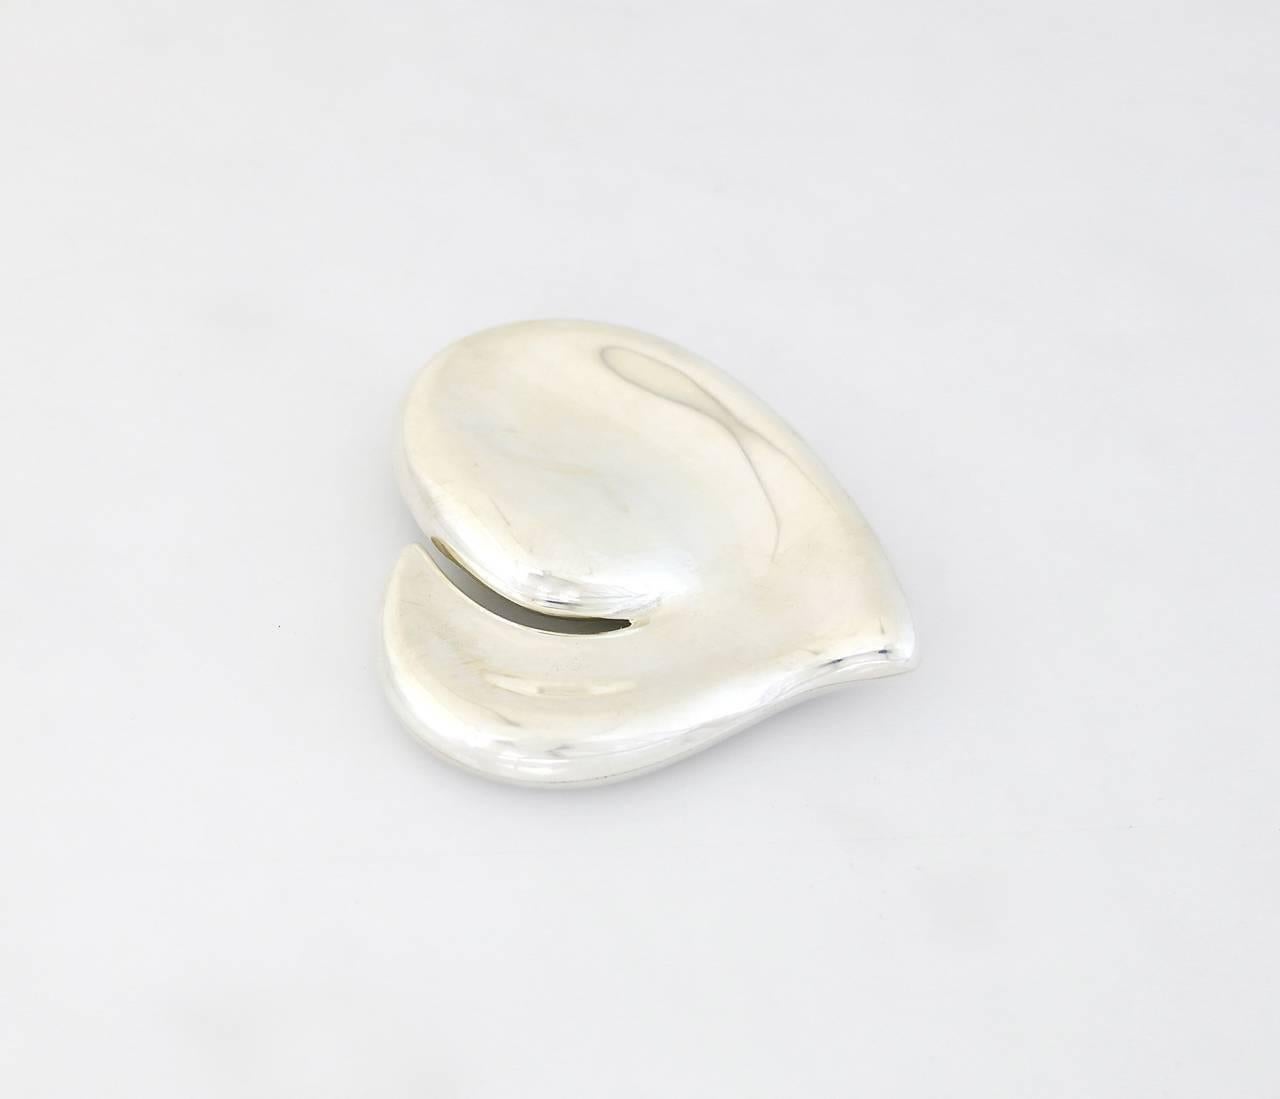 Tiffany & Co. Elsa Peretti Sterling Silver Heart Shaped Belt Buckle 1978 In Excellent Condition For Sale In New York, NY